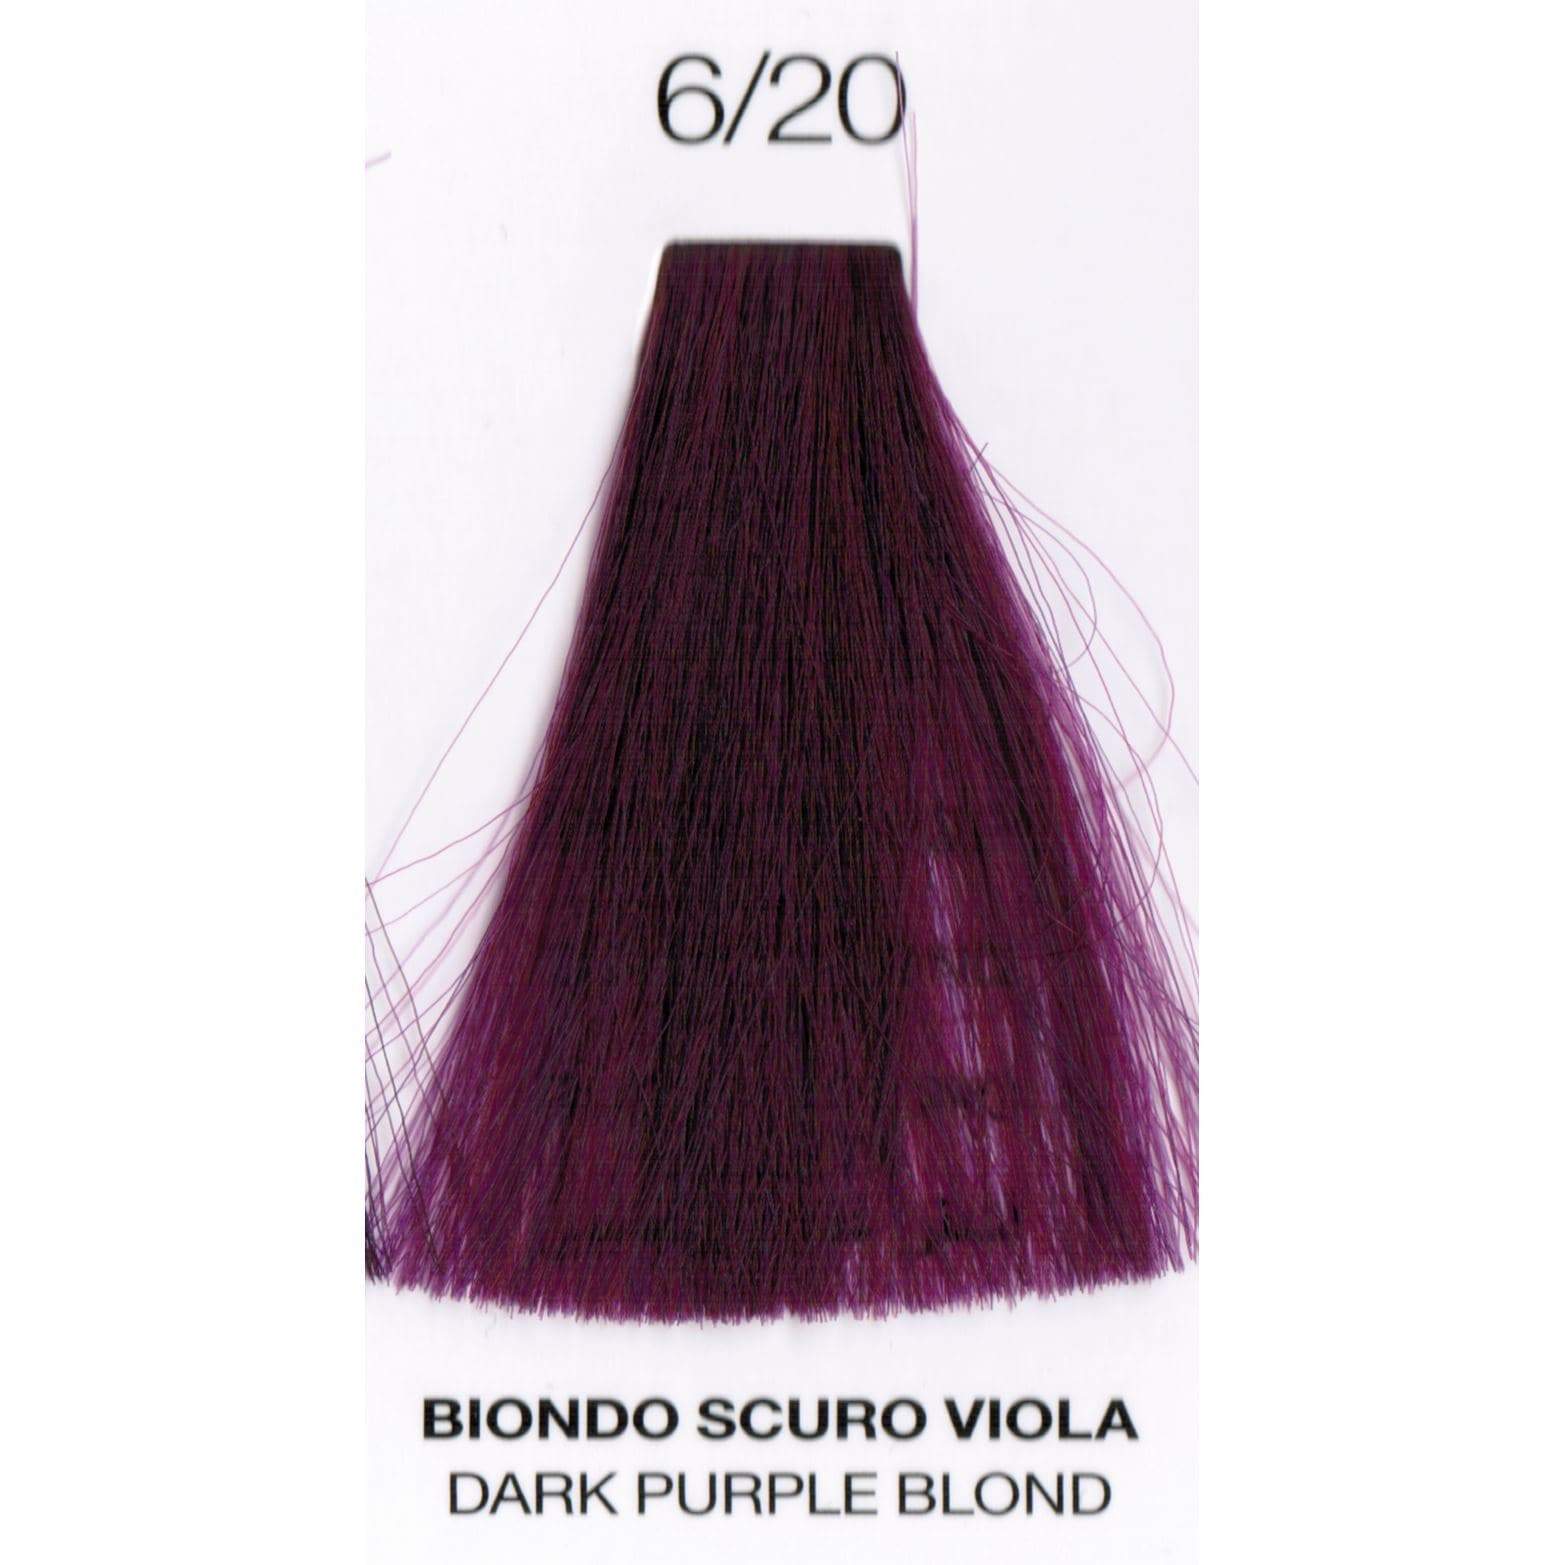 6/20 Dark Purple Blonde | Purity | Ammonia-Free Permanent Hair Color HAIR COLOR OYSTER 